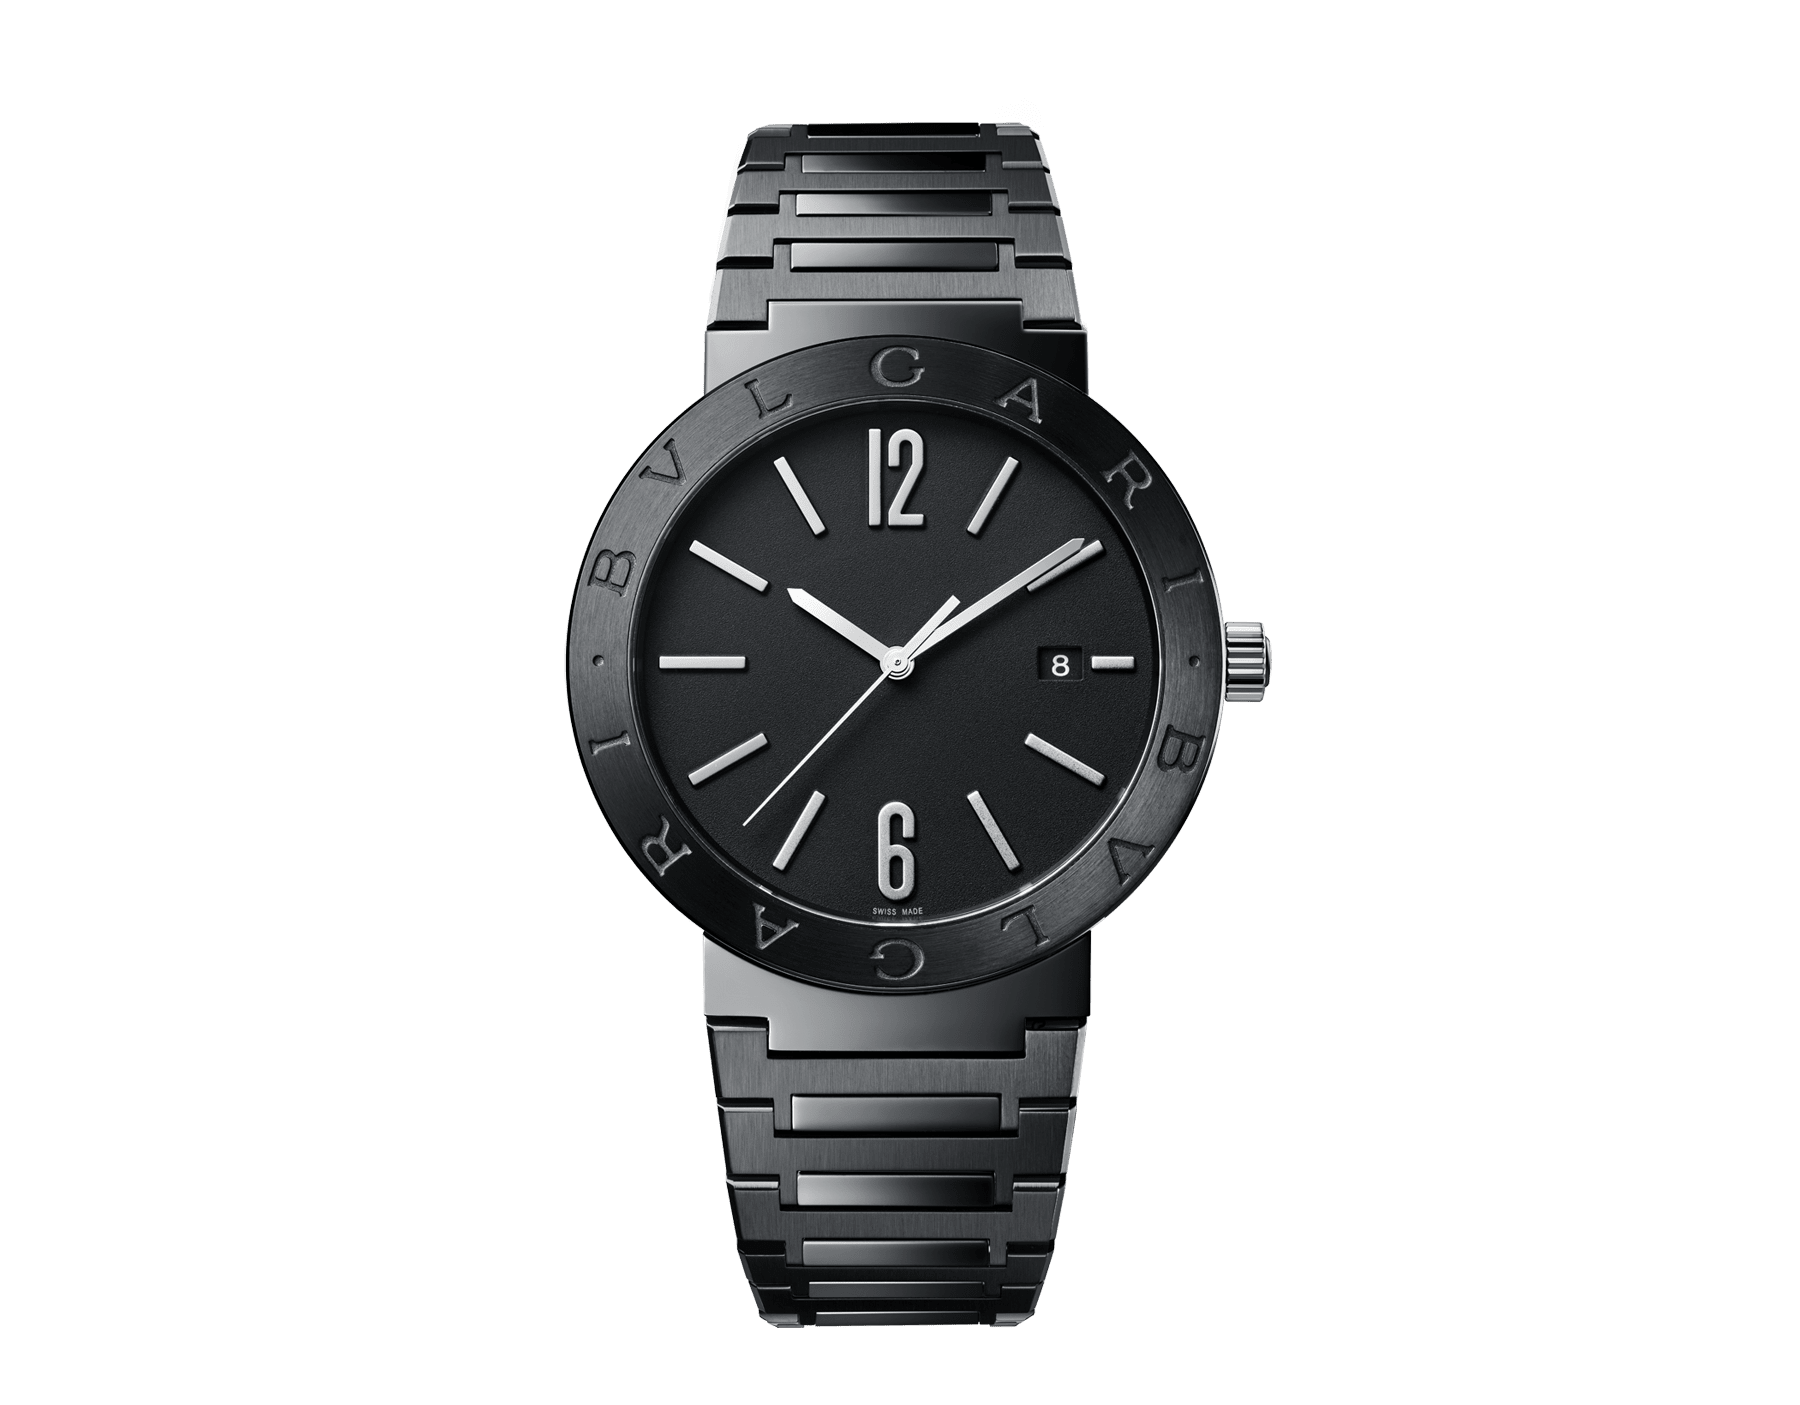 BVLGARI BVLGARI watch with mechanical manufacture movement, automatic winding and date, 41 mm stainless steel case and bracelet with diamond-like carbon treatment, and black lacquered dial. Water-resistant up to 50 meters 103540 image 1